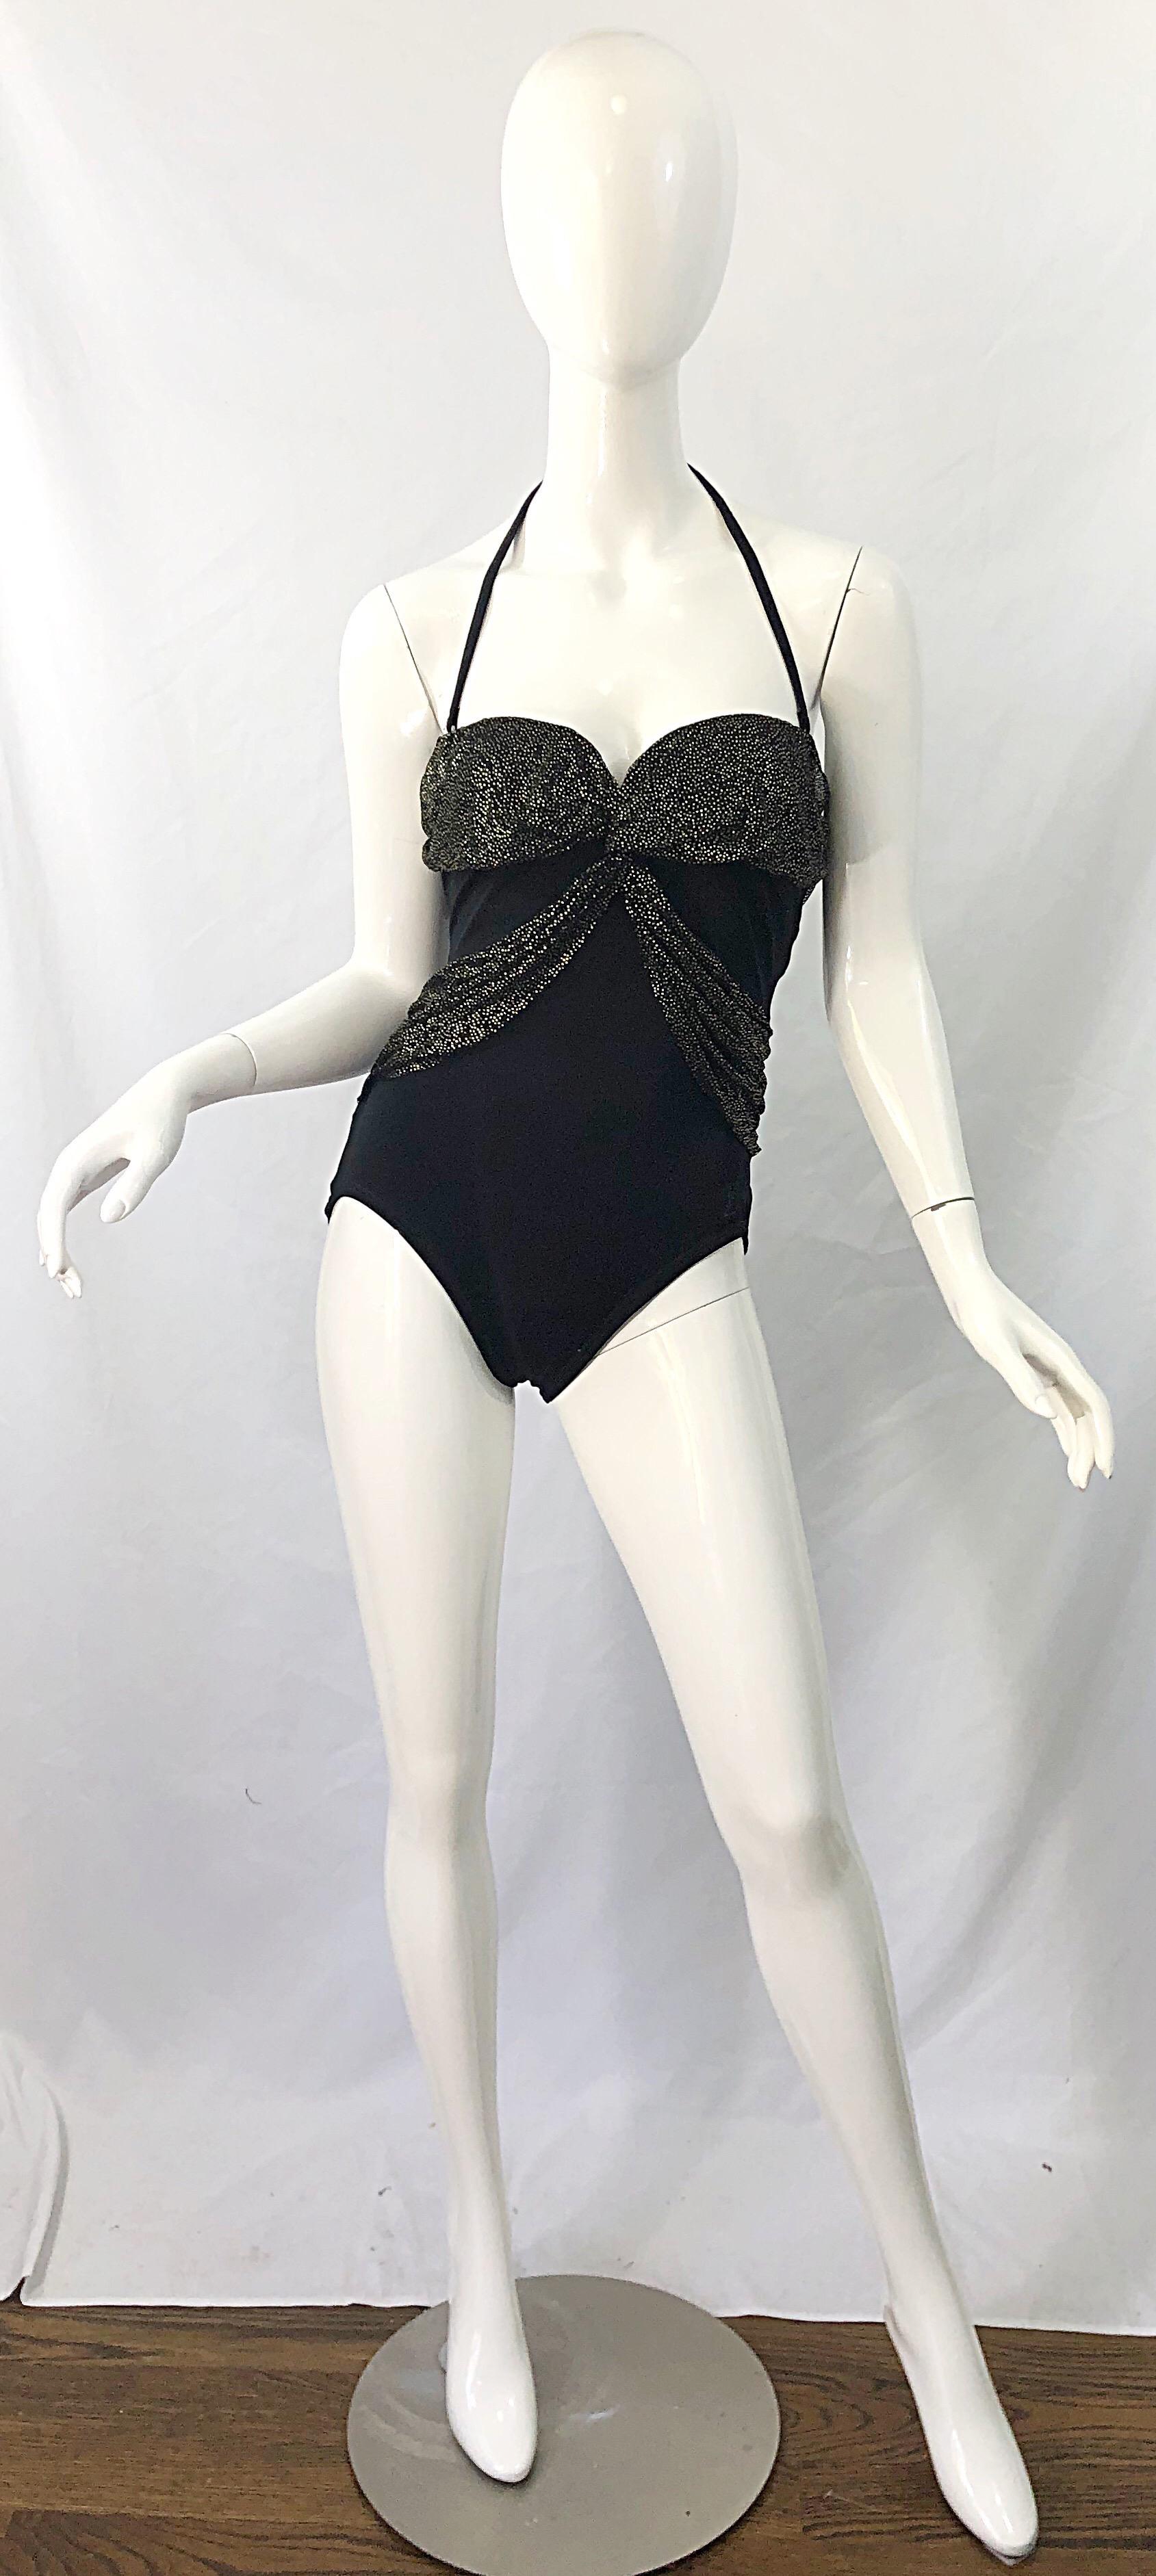 Sexy vintage early 80s YVES SAINT LAURENT black and gold convertible halter strap one piece swimsuit or bodysuit ! Features a black body with black and gold speckled mesh overlay at bust and side waist. Convertible halter straps can be easily